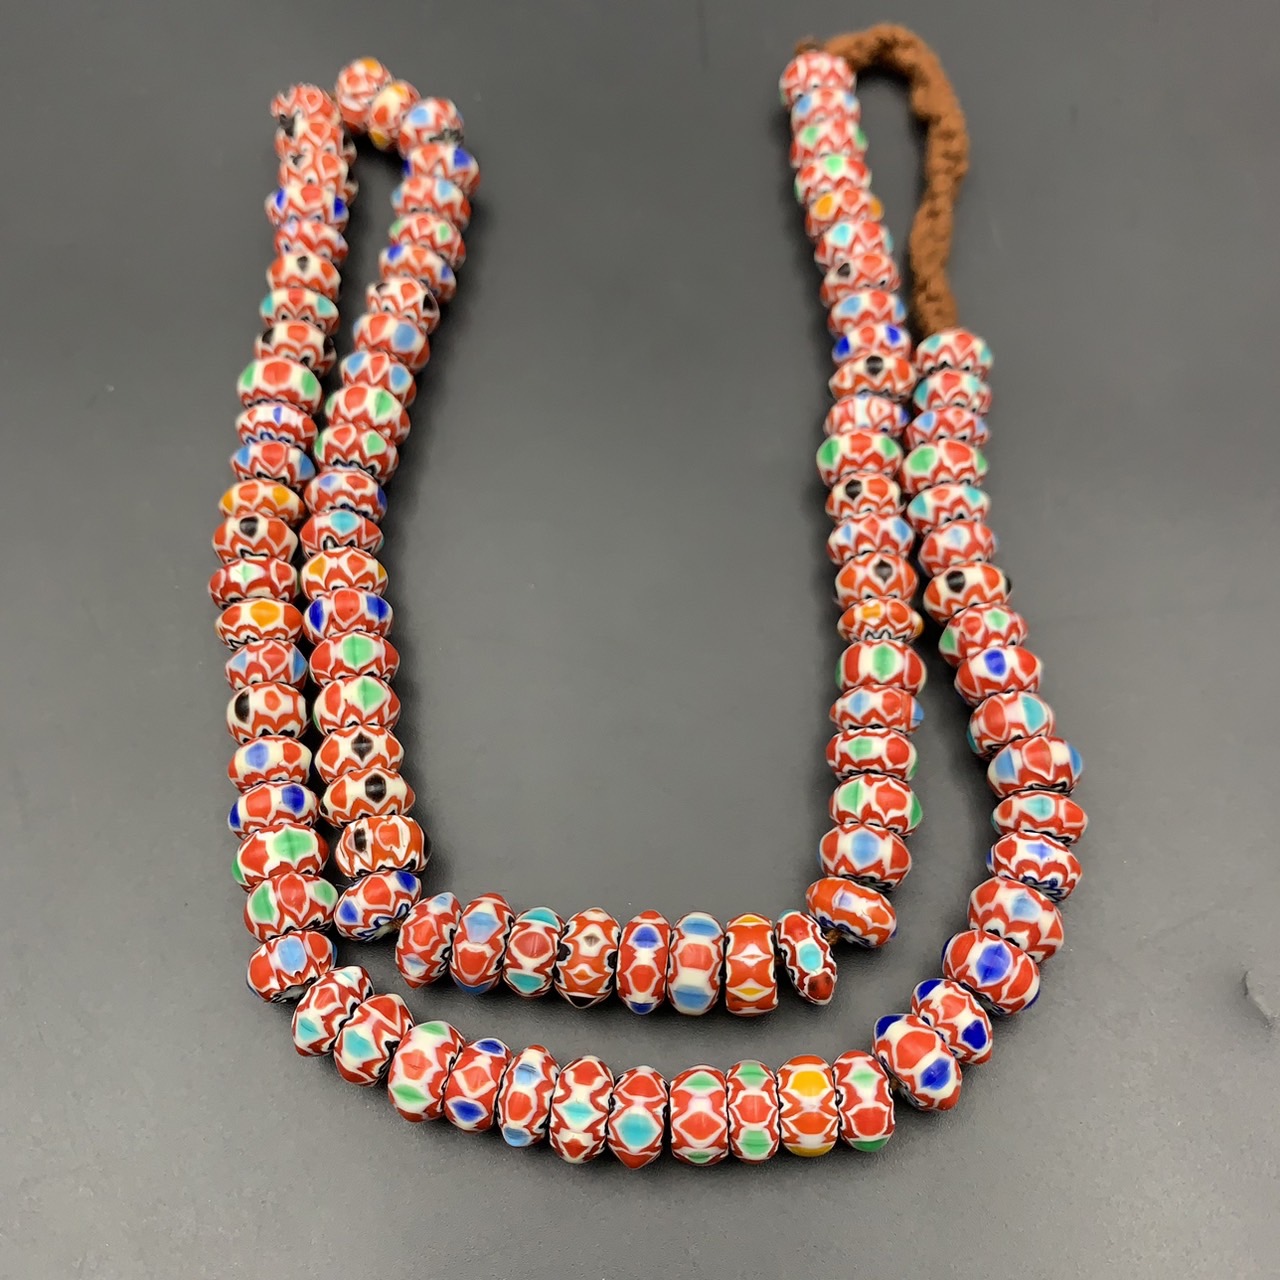 Wonderful Tiny Vintage Chevron Trade African Glass Beads Strand, LPBR-0311 - Image 8 of 11